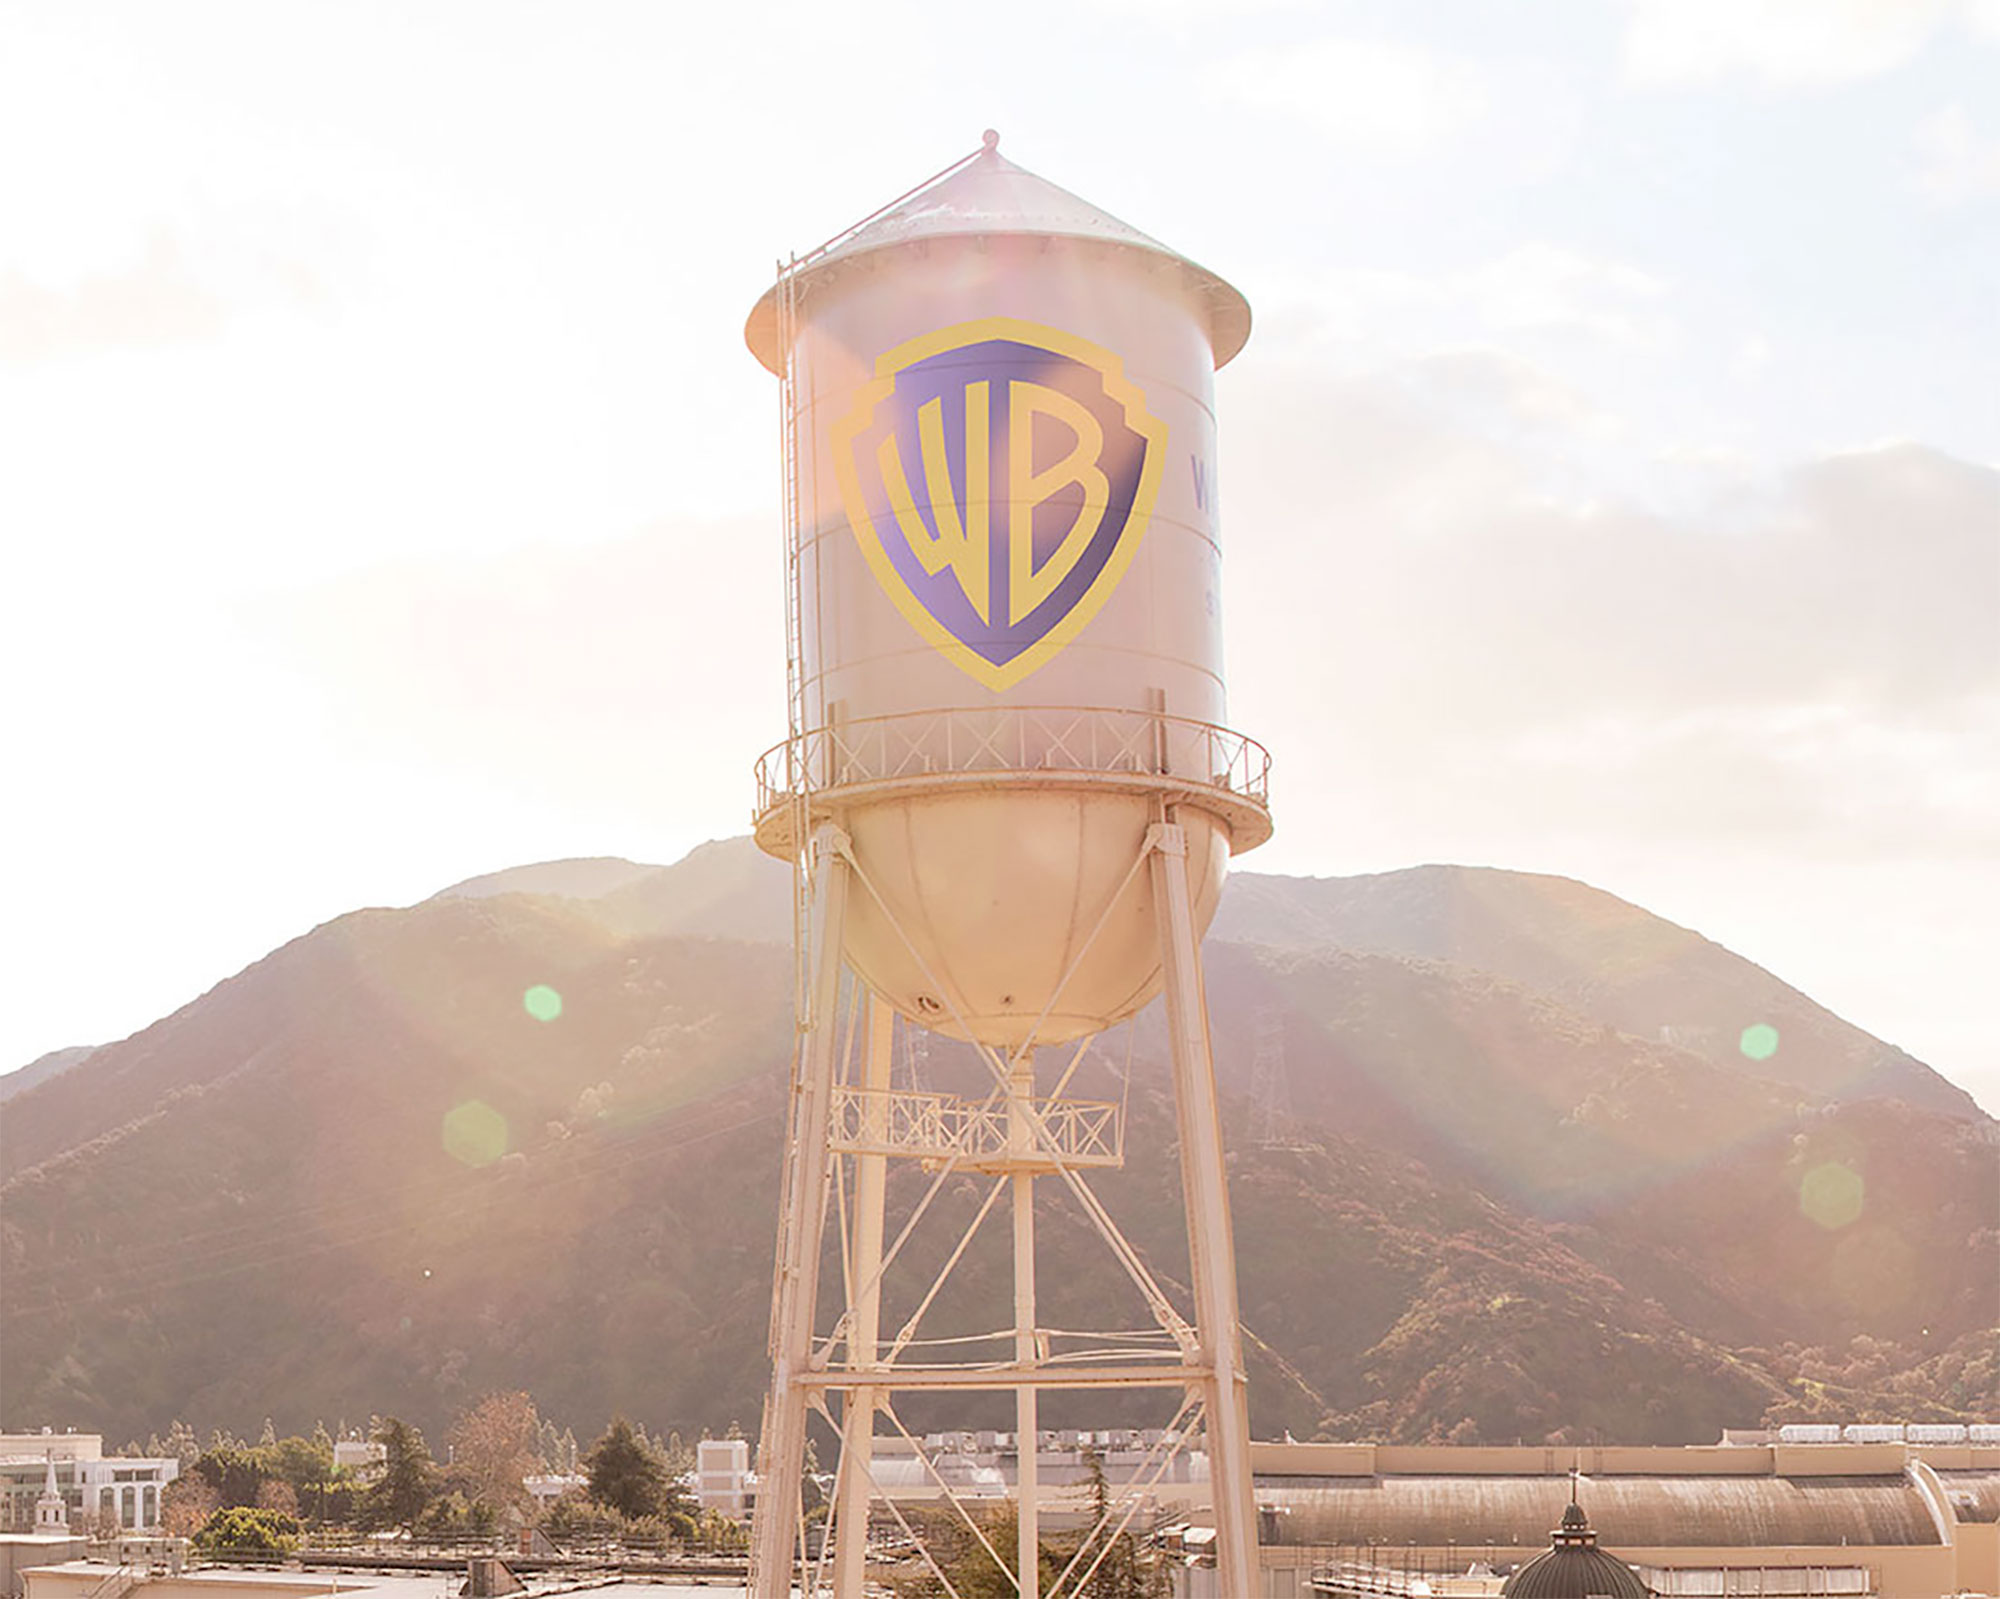 Photo of the WBD water tower on the Warner Bros. lot in Burbank, California